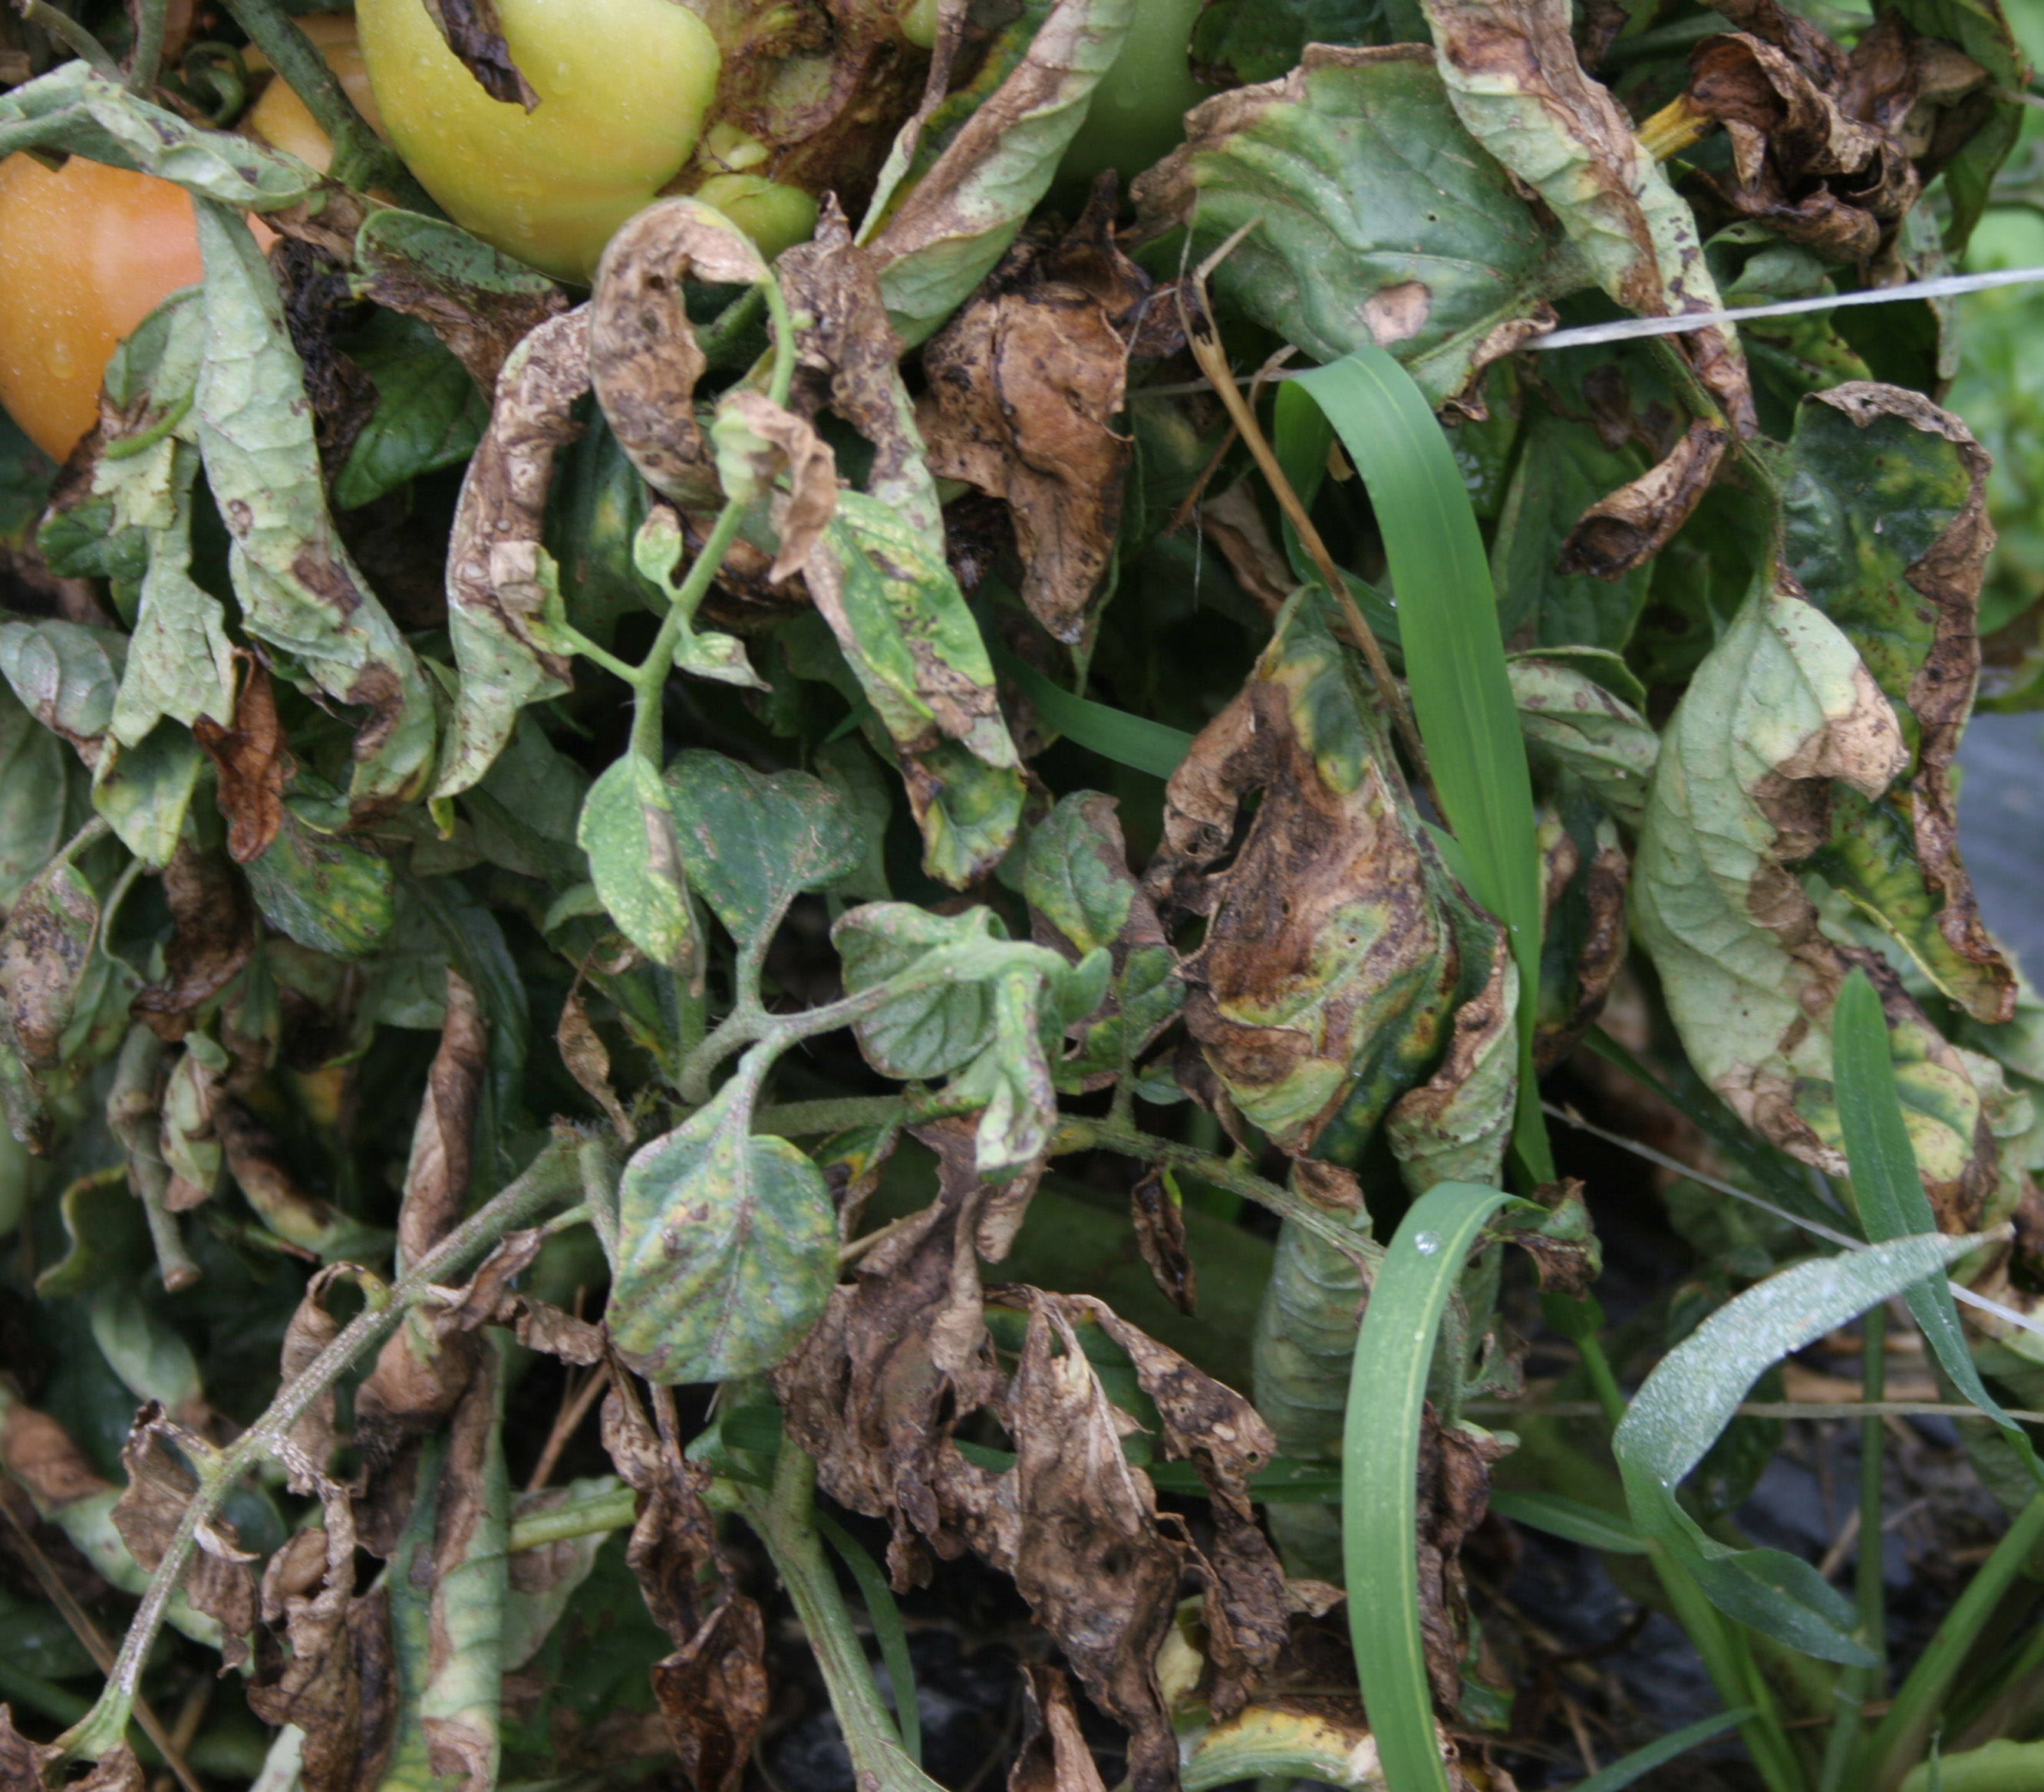 Early blight on tomato foliage in planting.